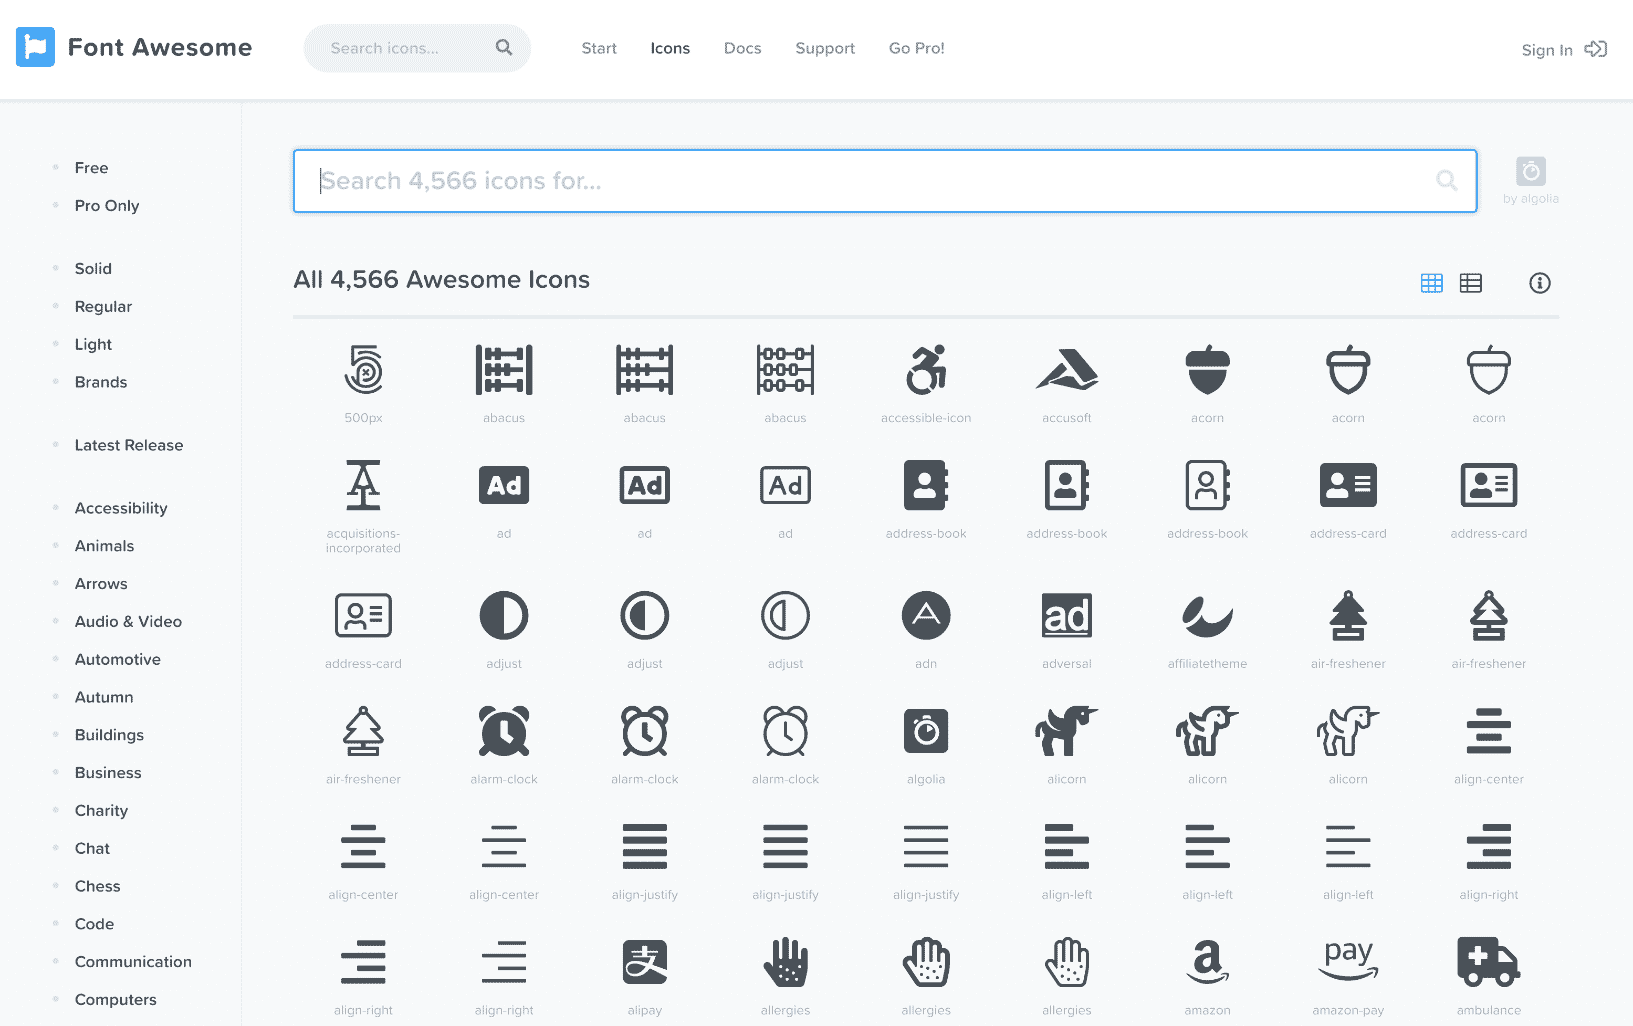 Font Awesome icons